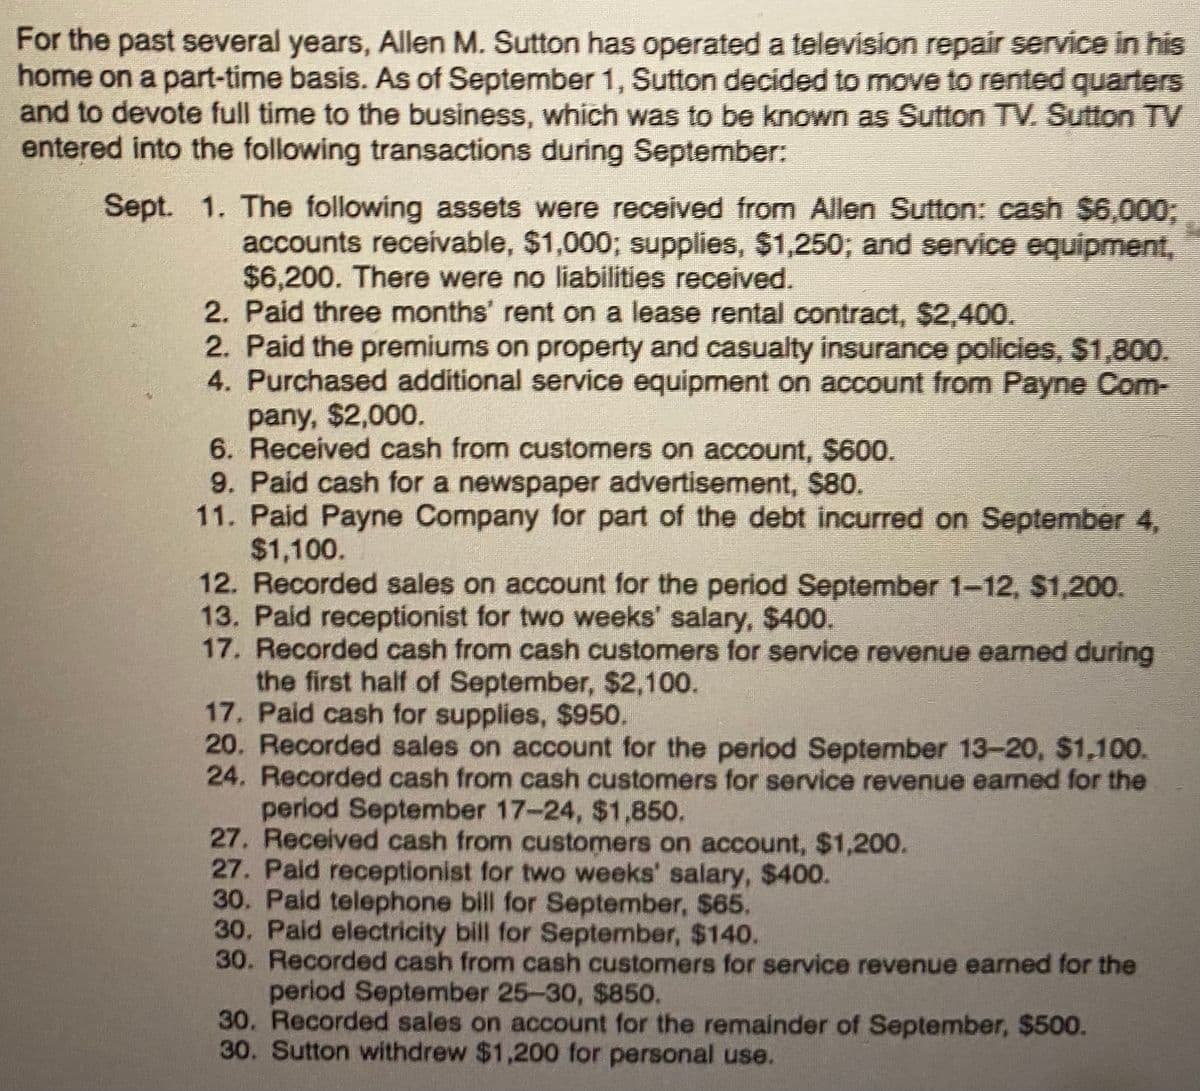 For the past several years, Allen M. Sutton has operated a television repair service in his
home on a part-time basis. As of September 1, Sutton decided to move to rented quarters
and to devote full time to the business, which was to be known as Sutton TV. Sutton TV
entered into the following transactions during September:
Sept. 1. The following assets were received from Allen Sutton: cash $6,000;
accounts receivable, $1,000; supplies, $1,250; and service equipment,
$6,200. There were no liabilities received.
2. Paid three months' rent on a lease rental contract, $2,400.
2. Paid the premiums on property and casualty insurance policies, $1,800.
4. Purchased additional service equipment on account from Payne Com-
pany, $2,000.
6. Received cash from customers on account, $600.
9. Paid cash for a newspaper advertisement, $80.
11. Paid Payne Company for part of the debt incurred on September 4,
$1,100.
12. Recorded sales on account for the period September 1-12, $1,200.
13. Paid receptionist for two weeks' salary, $400.
17. Recorded cash from cash customers for service revenue earned during
the first half of September, $2,100.
17. Paid cash for supplies, $950.
20. Recorded sales on account for the period September 13-20, $1,100.
24. Recorded cash from cash customers for service revenue earned for the
period September 17-24, $1,850.
27. Received cash from customers on account, $1,200.
27. Paid receptionist for two weeks' salary, $400.
30. Paid telephone bill for September, $65.
30. Paid electricity bill for September, $140.
30. Recorded cash from cash customers for service revenue earned for the
period September 25-30, $850.
30. Recorded sales on account for the remainder of September, $500.
30. Sutton withdrew $1,200 for personal use.
